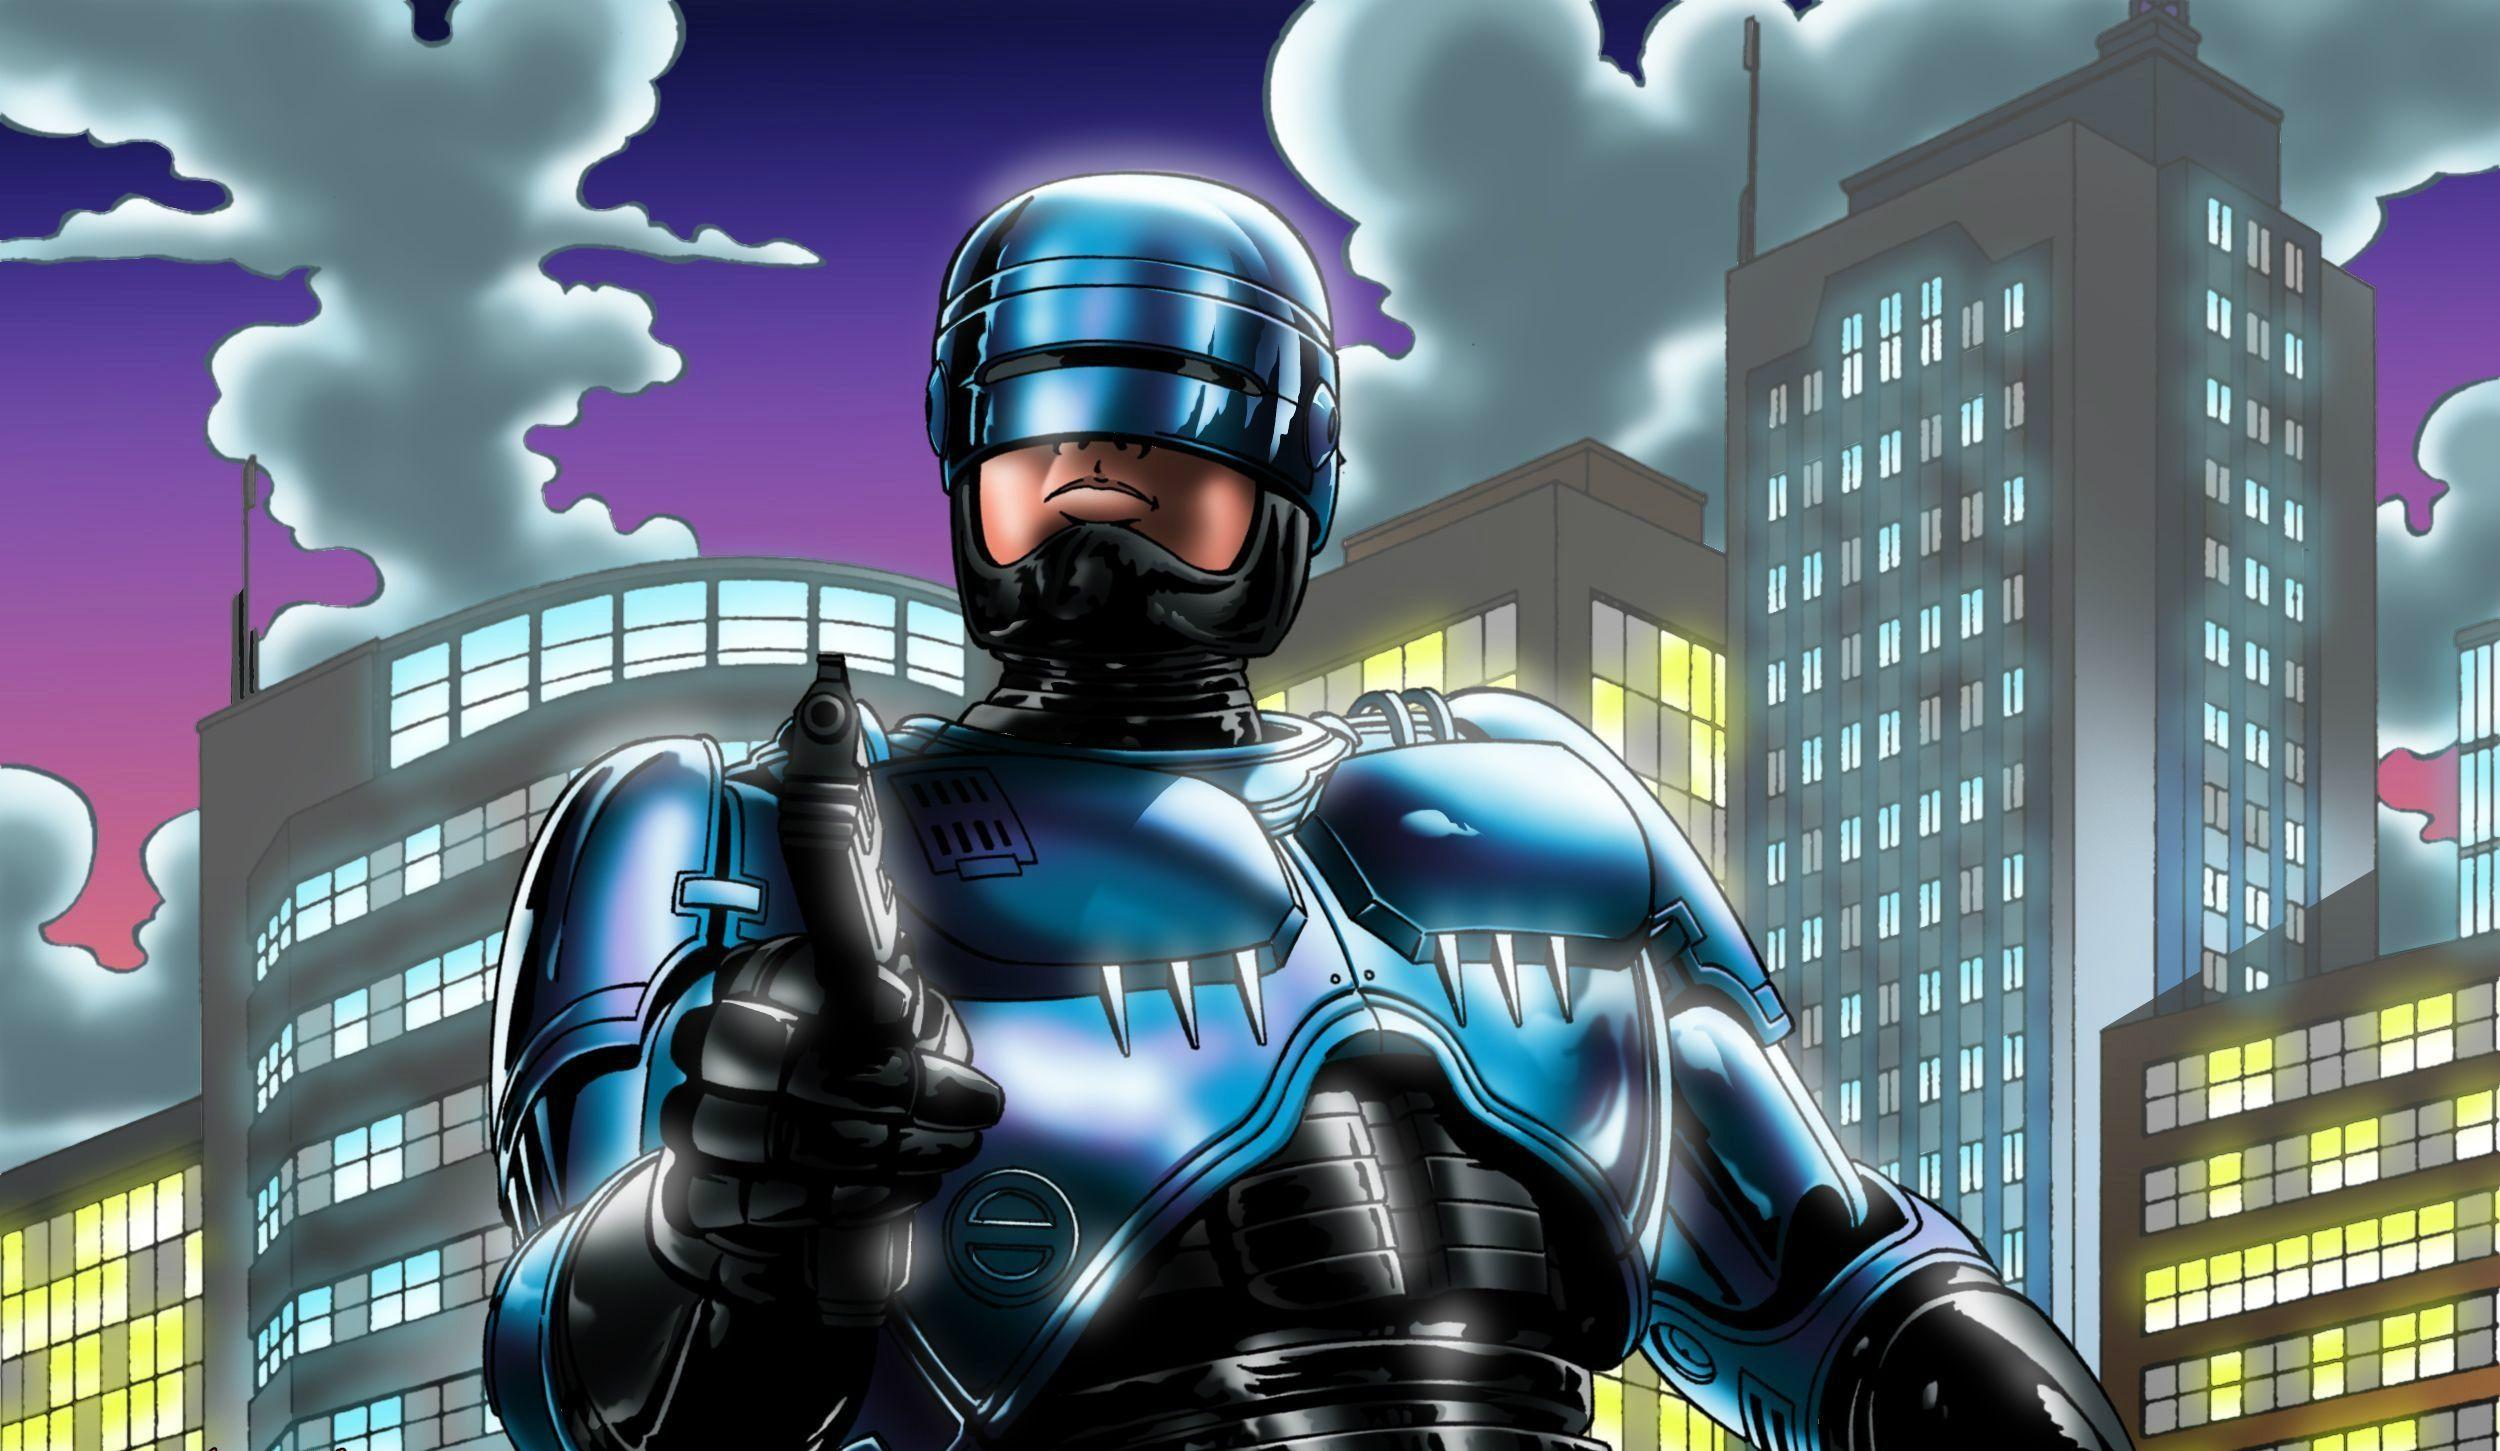 for iphone download RoboCop: Rogue City free